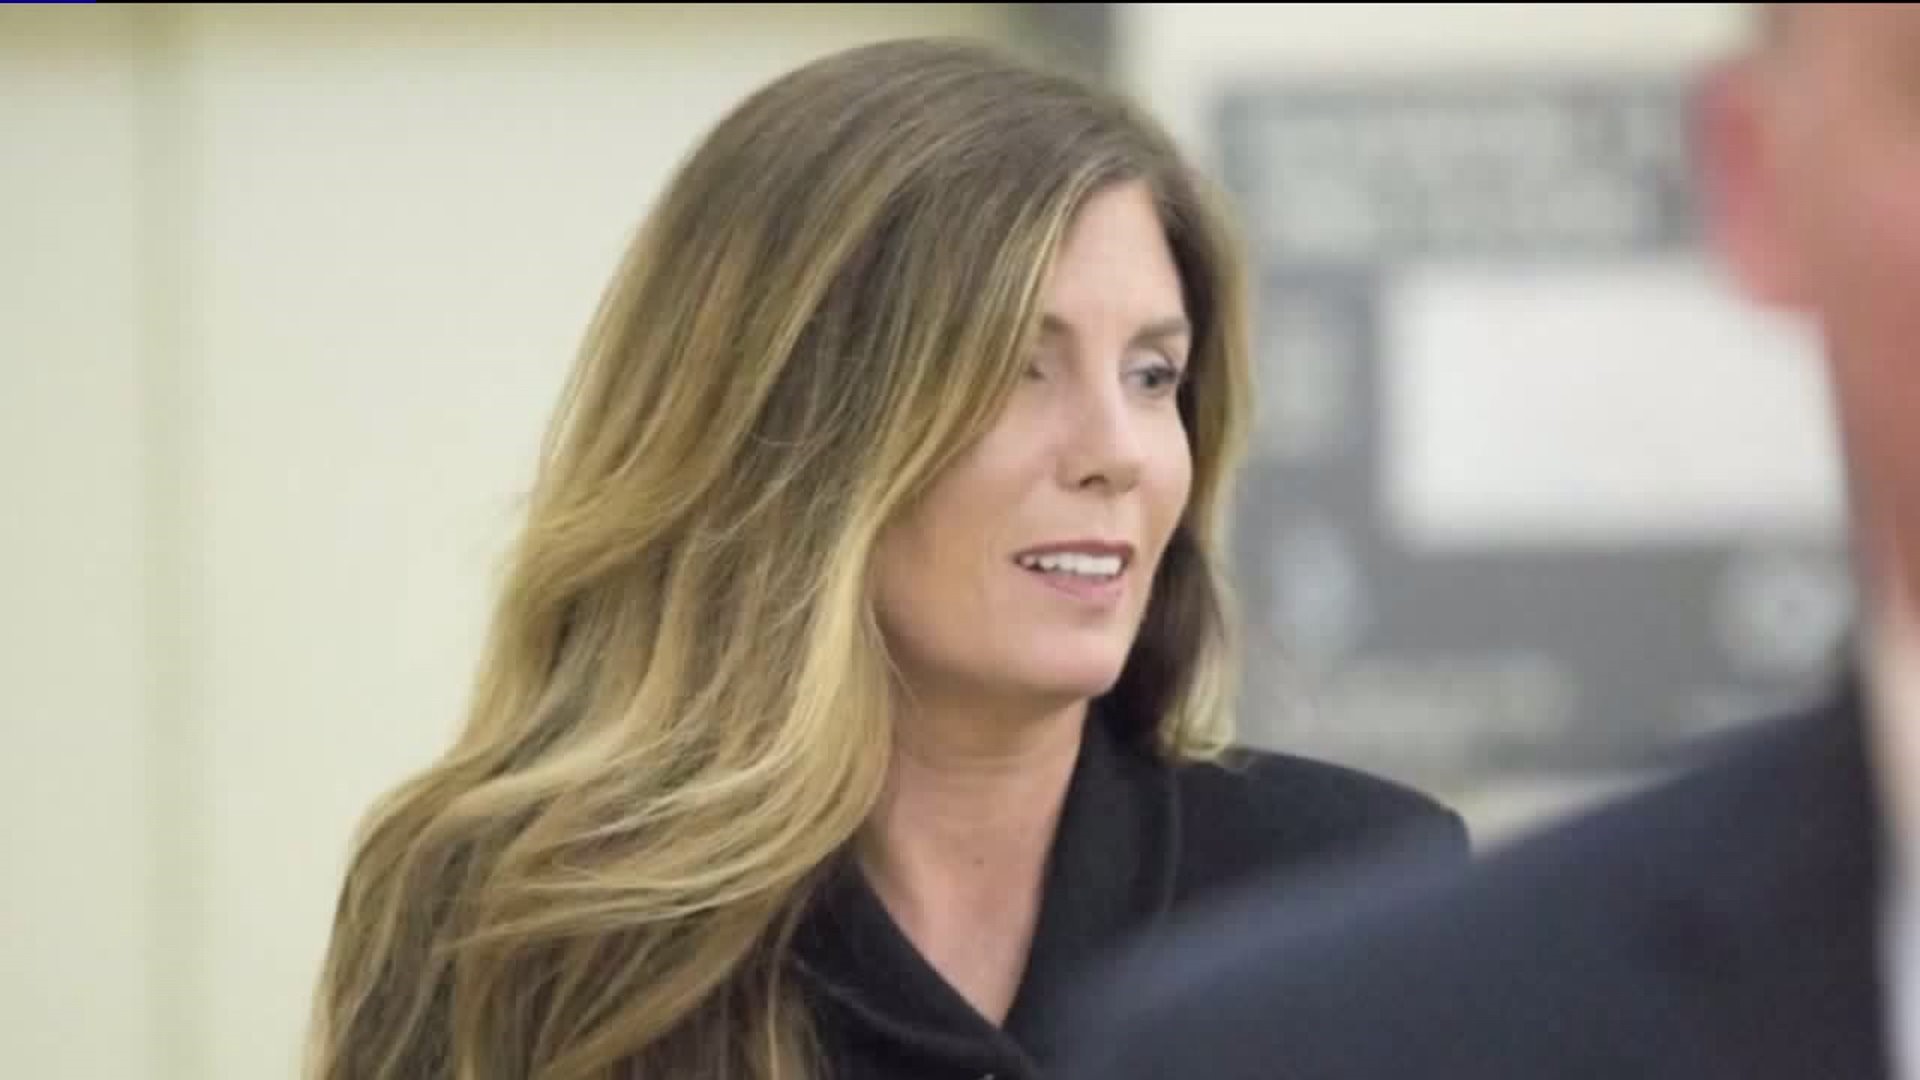 West Scranton Reacts to Kathleen Kane Reporting for Jail Time